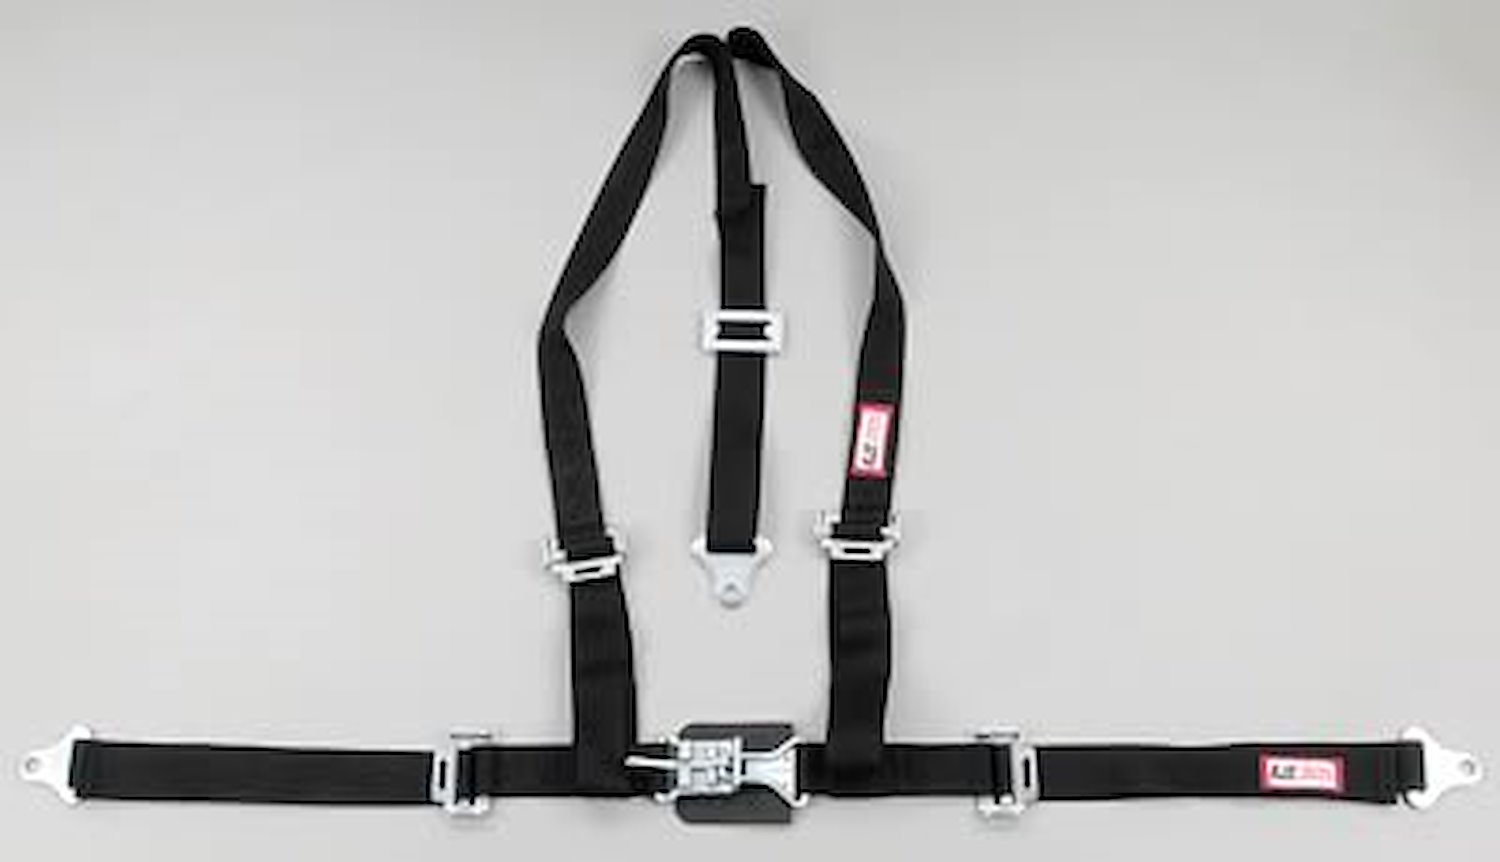 NON-SFI L&L HARNESS 3 PULL DOWN Lap BELT SEWN IN 2 S.H. Y FLOOR Mount w/STERNUM STRAP ALL WRAP ENDS RED